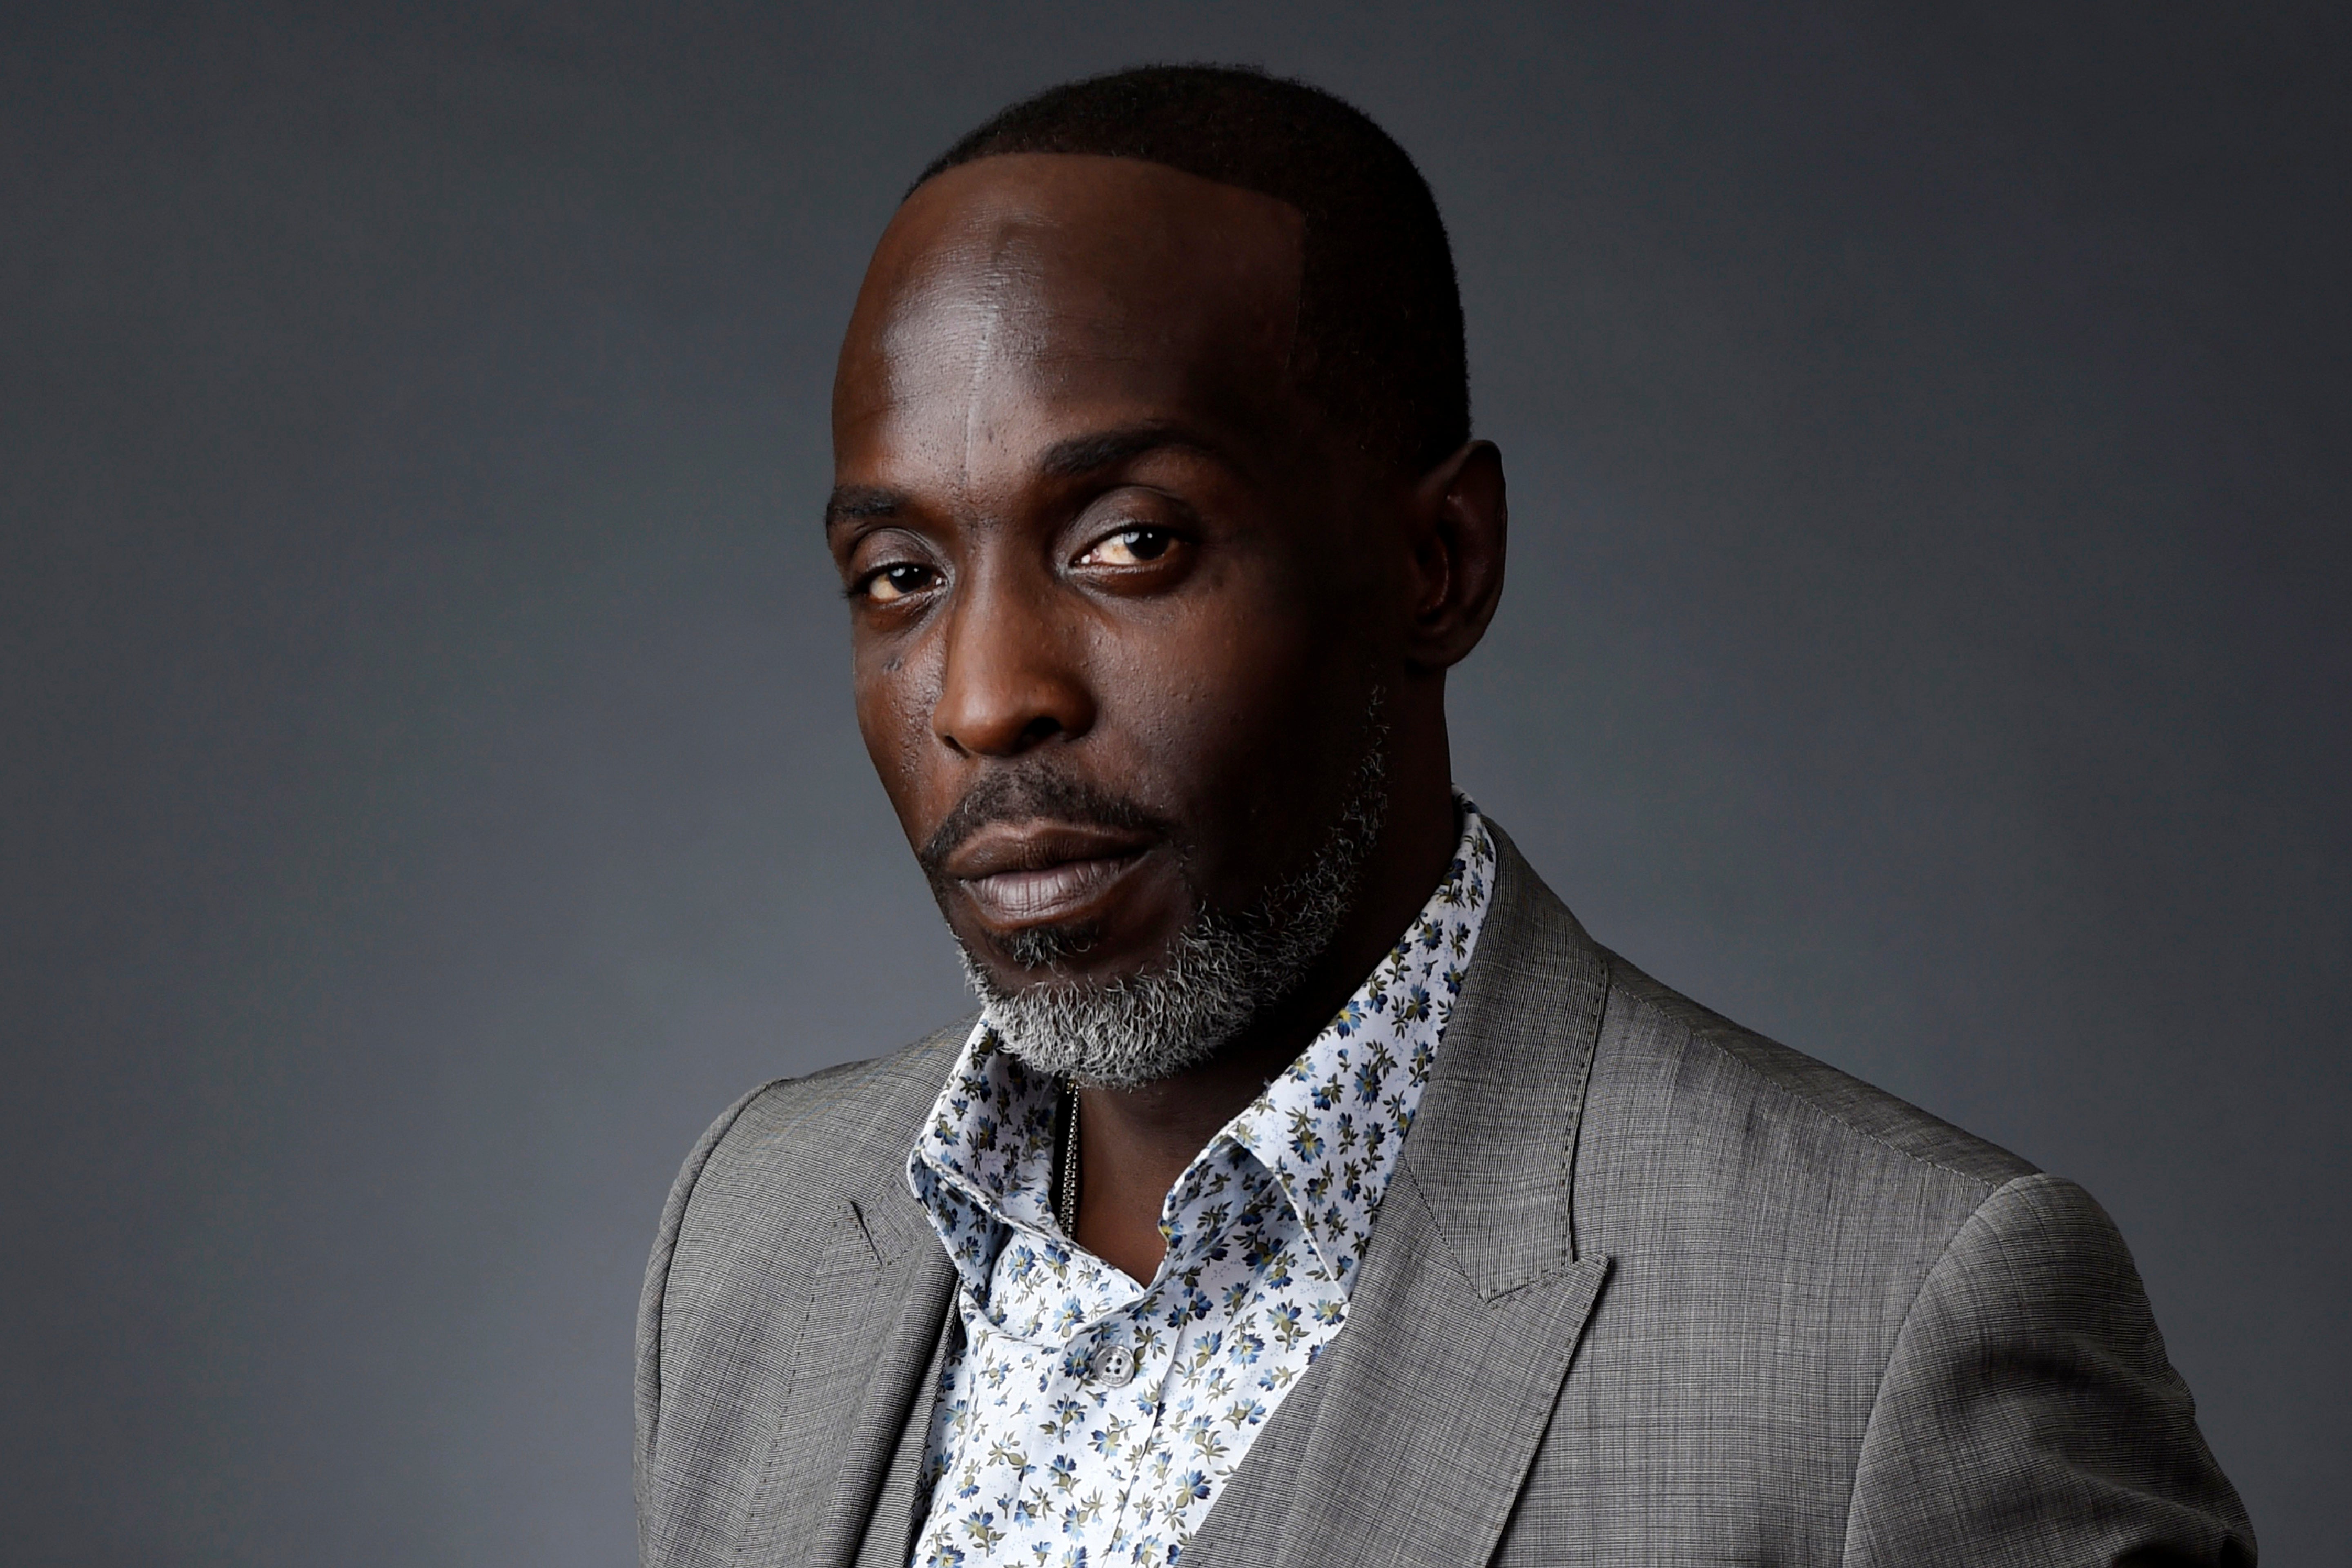 Dealer gets 10 years in prison in death of actor Michael K. Williams ...